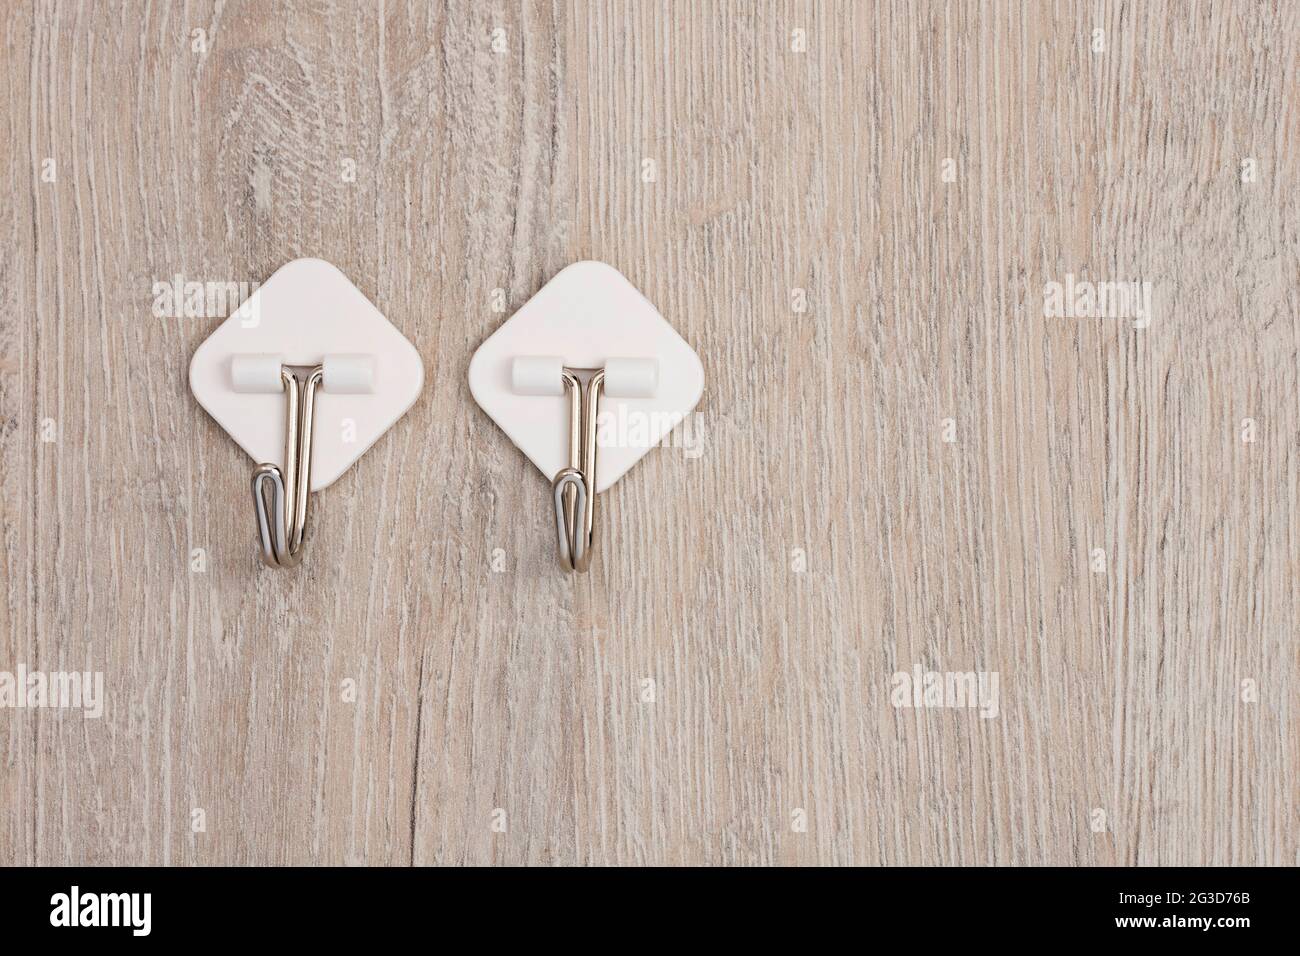 Two plastic adhesive utility wall fixed hooks with metal hooks for hanging clothes Stock Photo